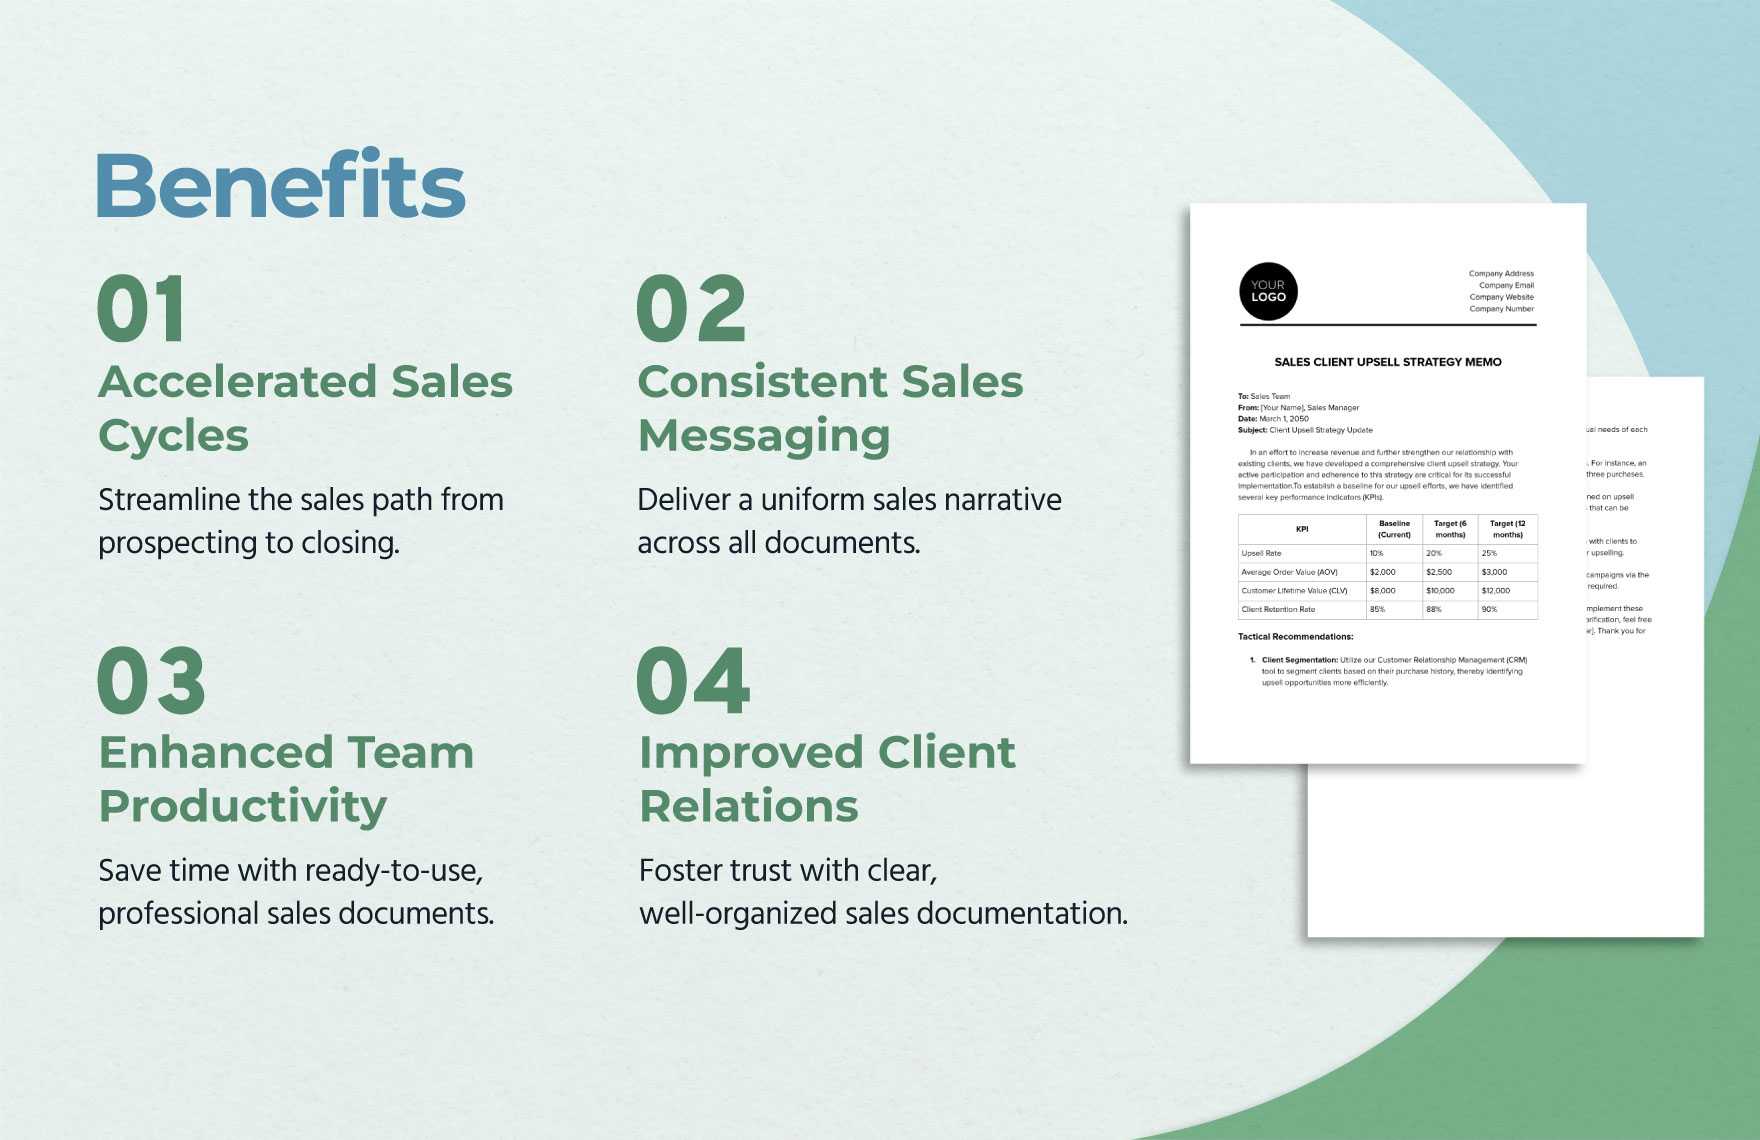 Sales Client Upsell Strategy Memo Template